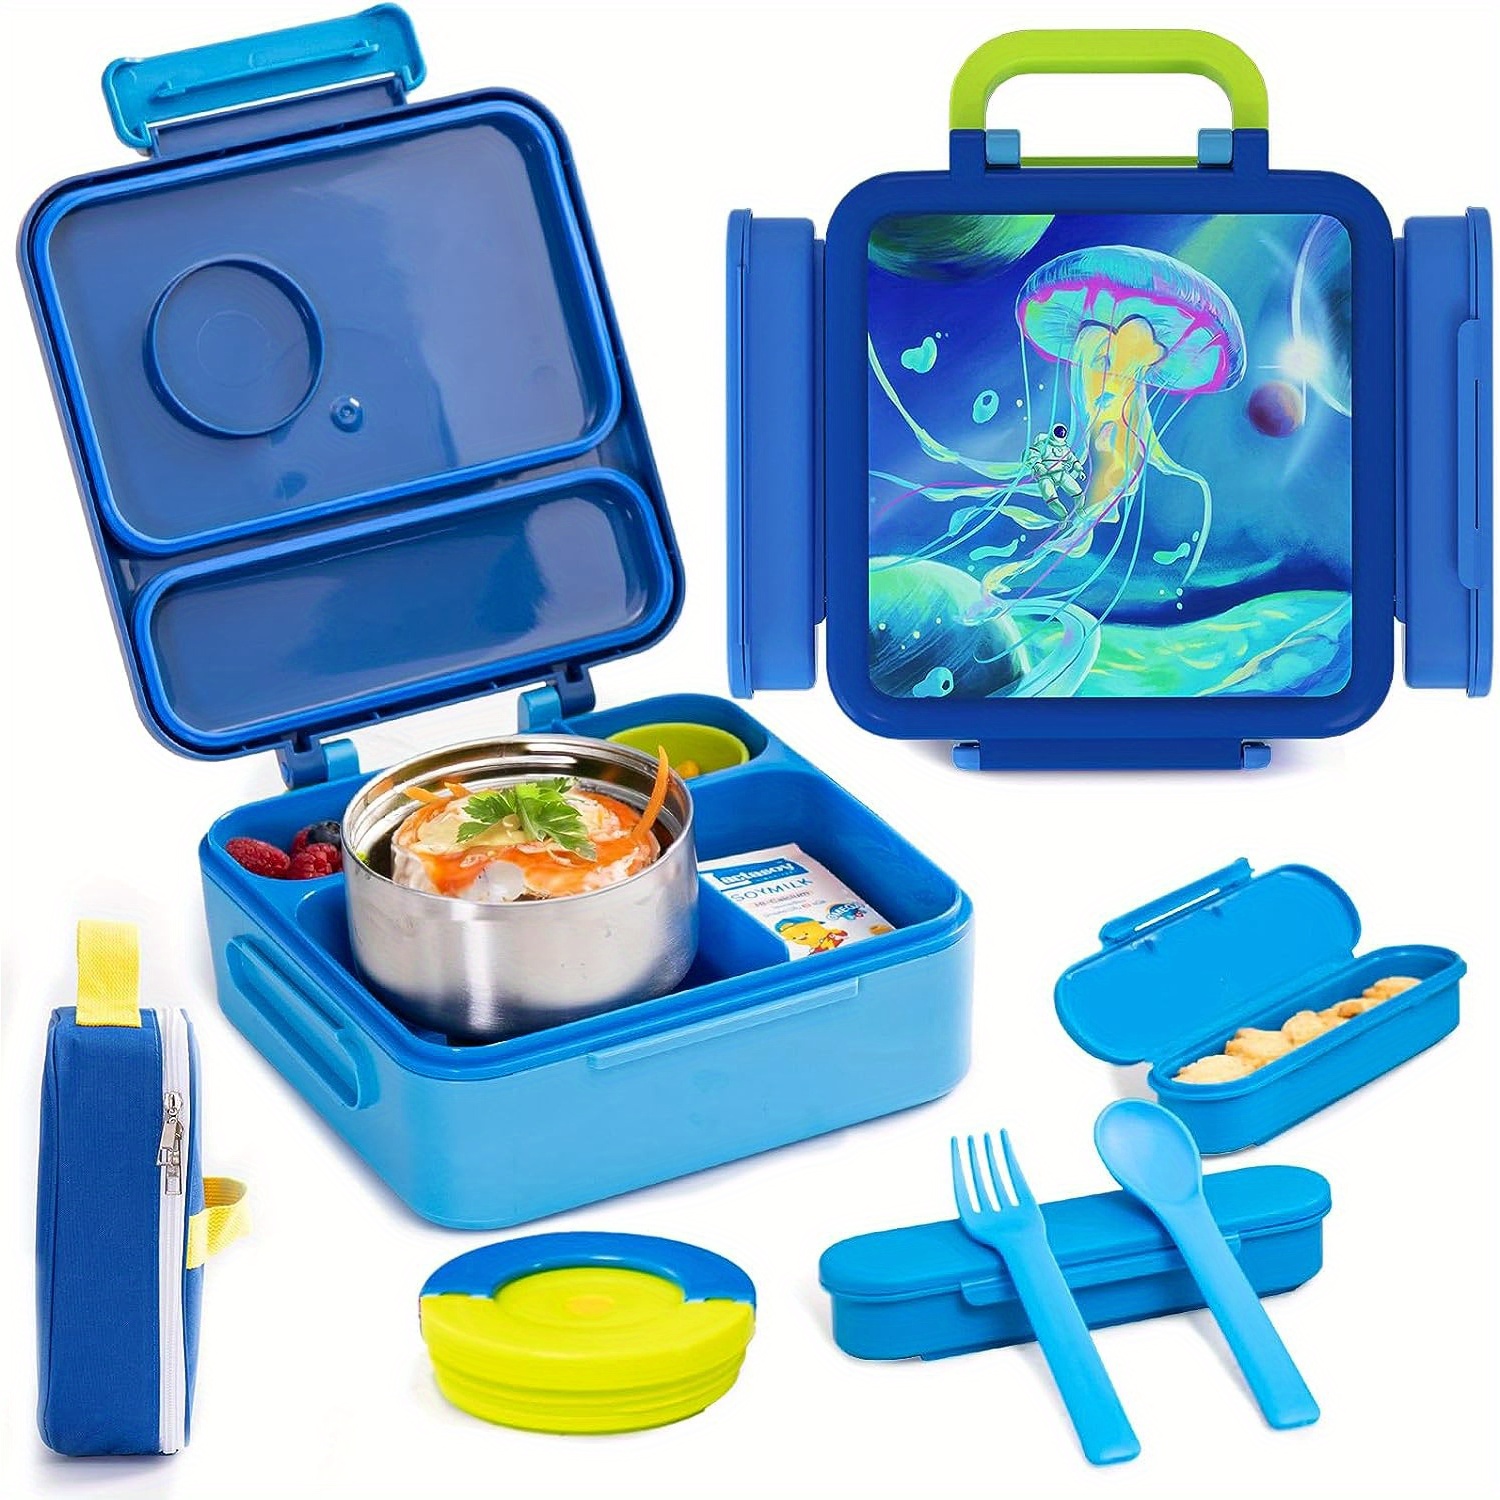 

Haixin Bento Box For Kids - Insulated Lunch Box With Thermos For Hot Food, Leak-proof Kids Lunch Box With Cutlery And Snack Box, 4-compartments Lunch Container For School Outdoors Office (blue)